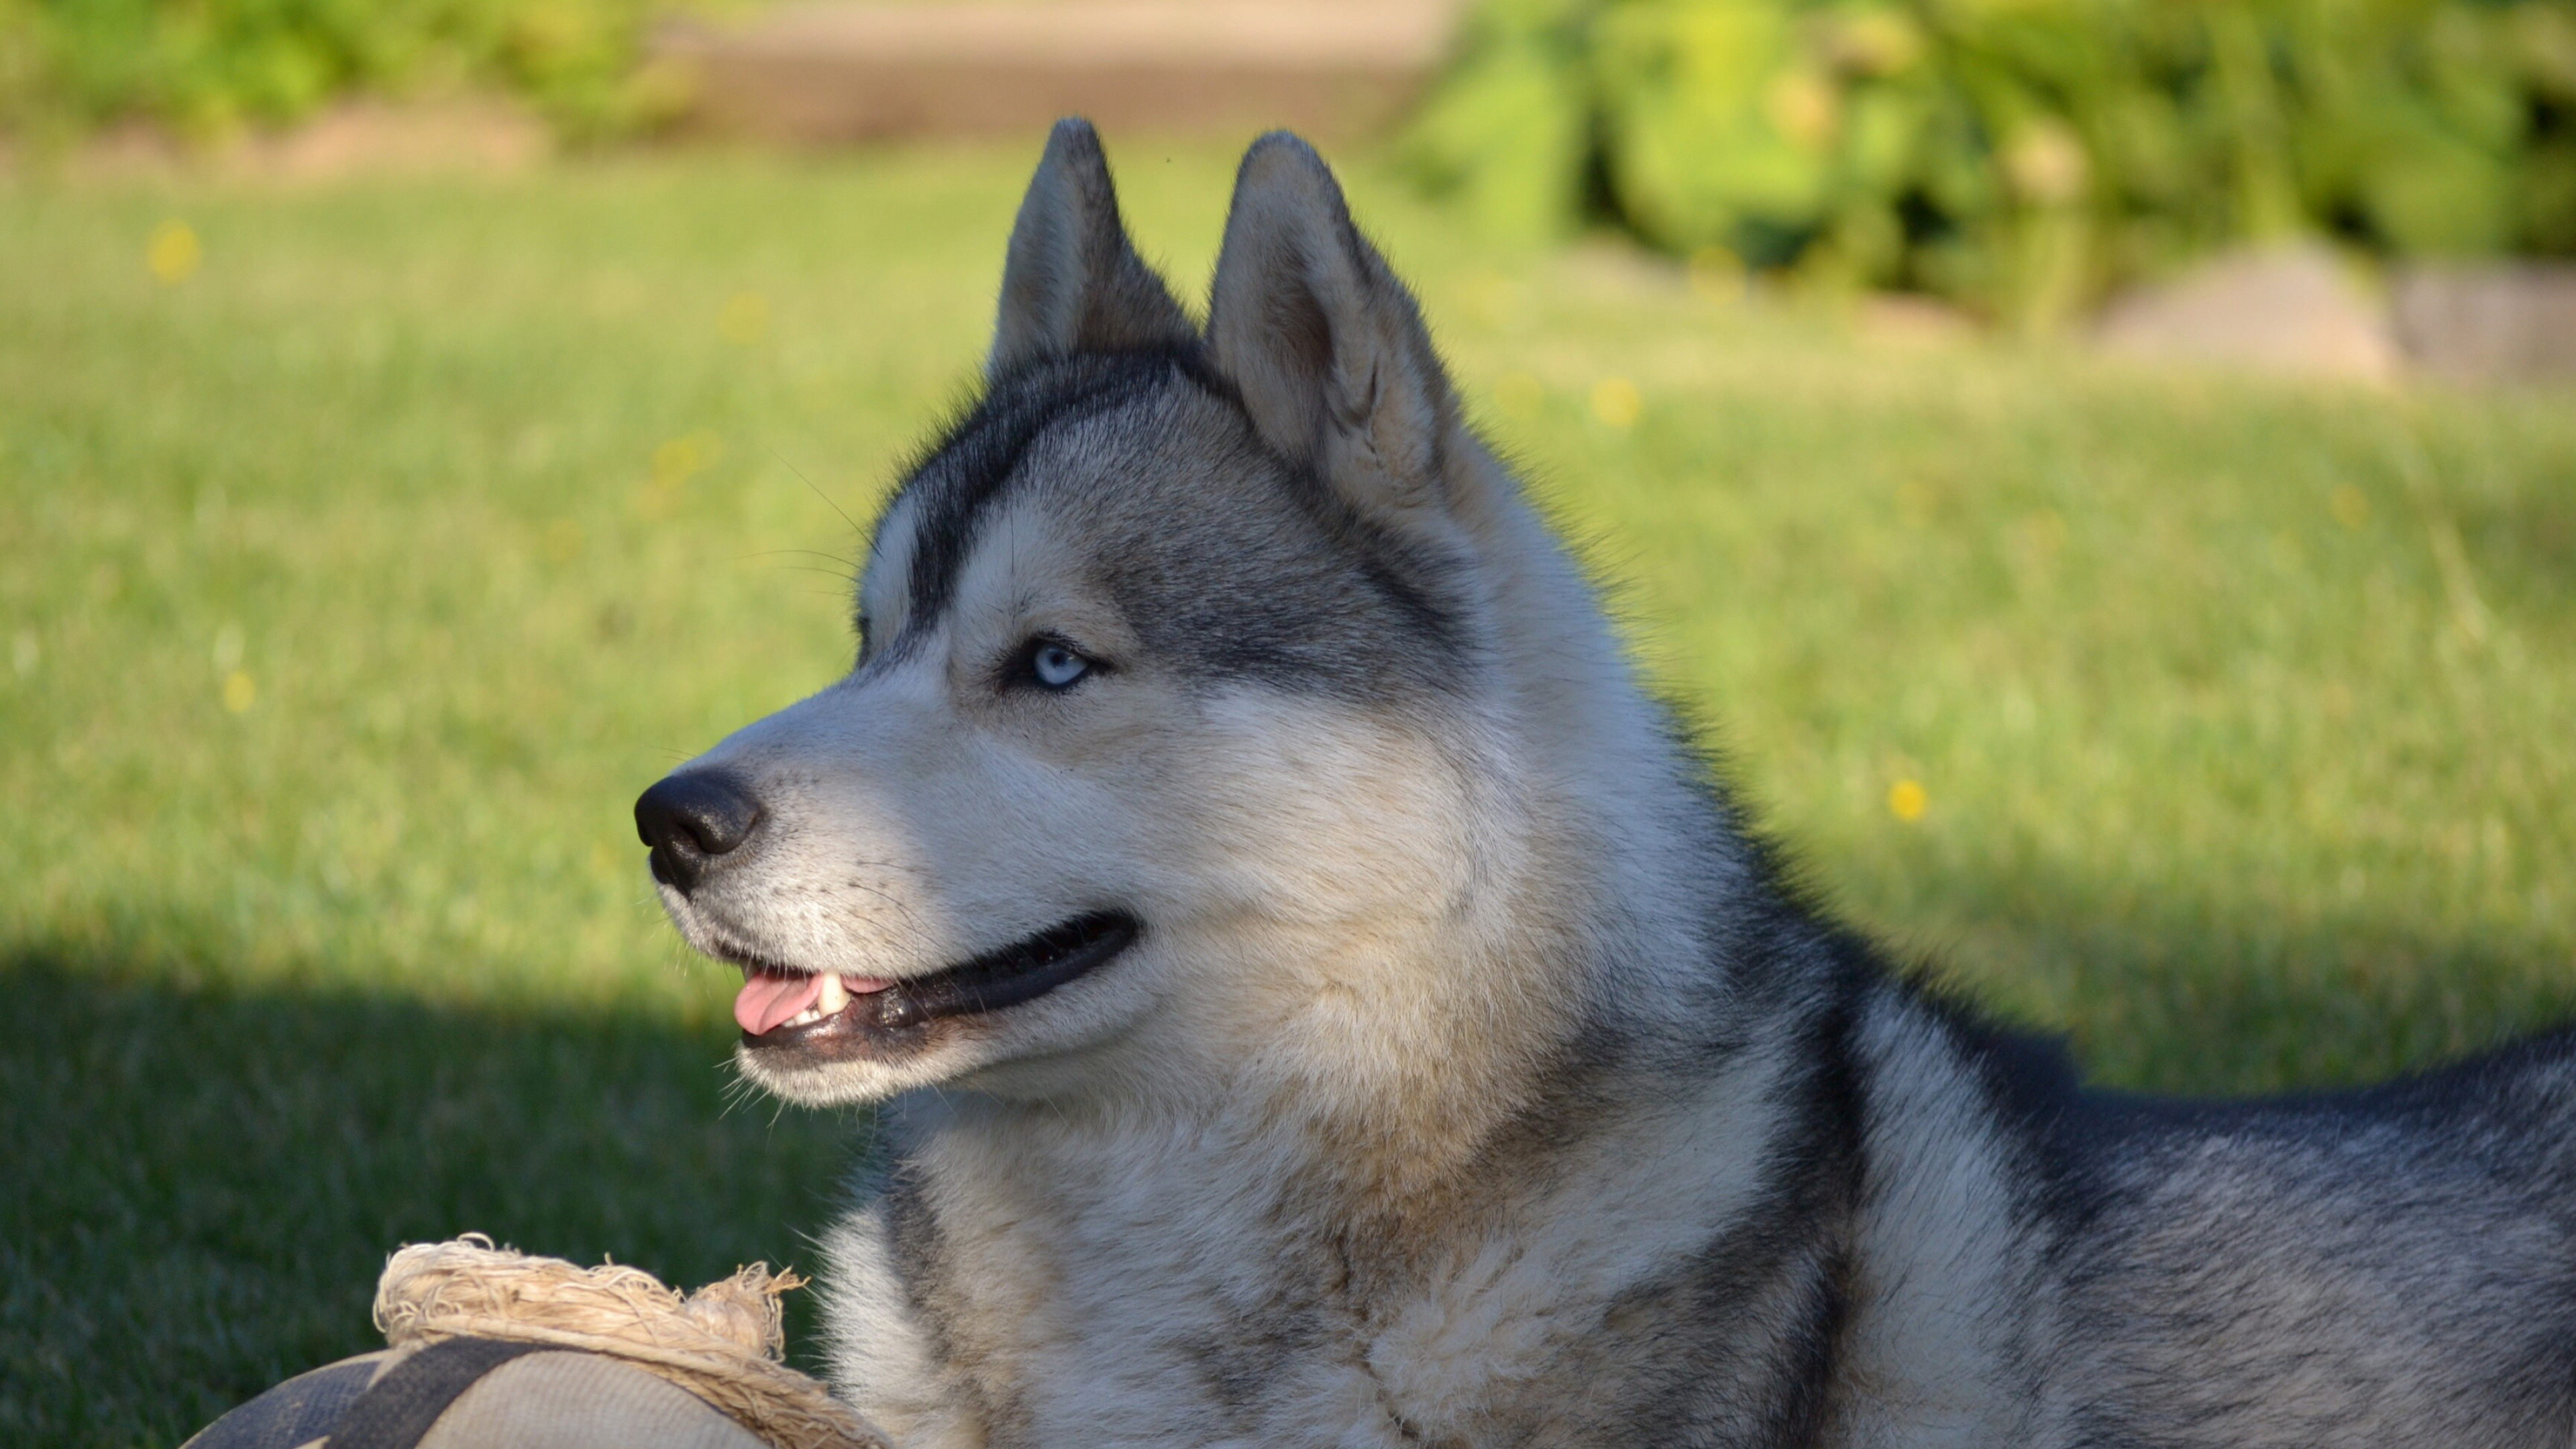 Siberian Husky: The breed of dogs, originated in Northeast Asia. 3840x2160 4K Background.